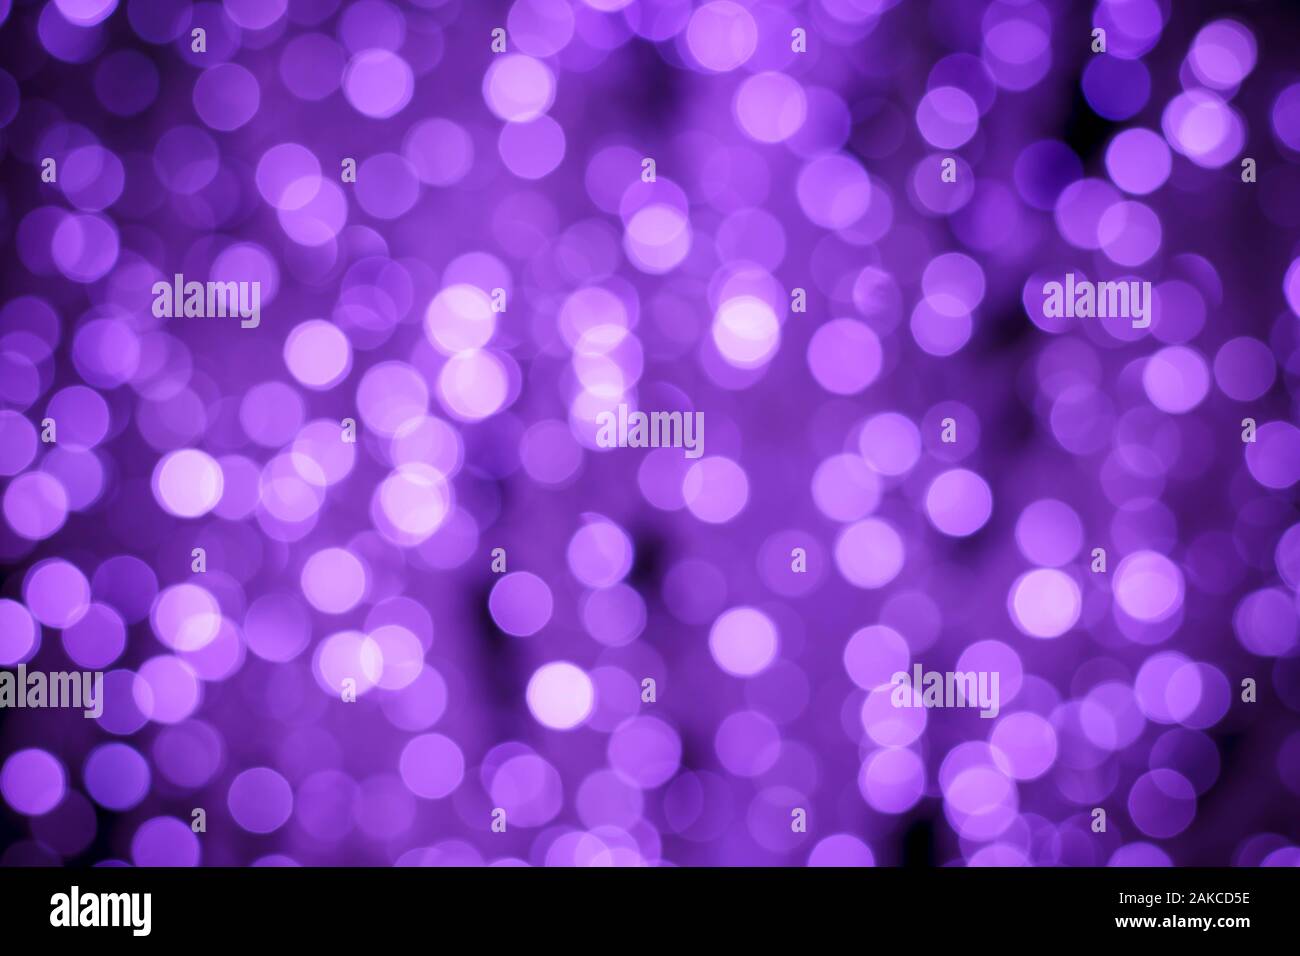 Abstract purple background with night lights of bokeh. Blurred backdrop, defocused shiny circles. Texture with illuminated effect Stock Photo